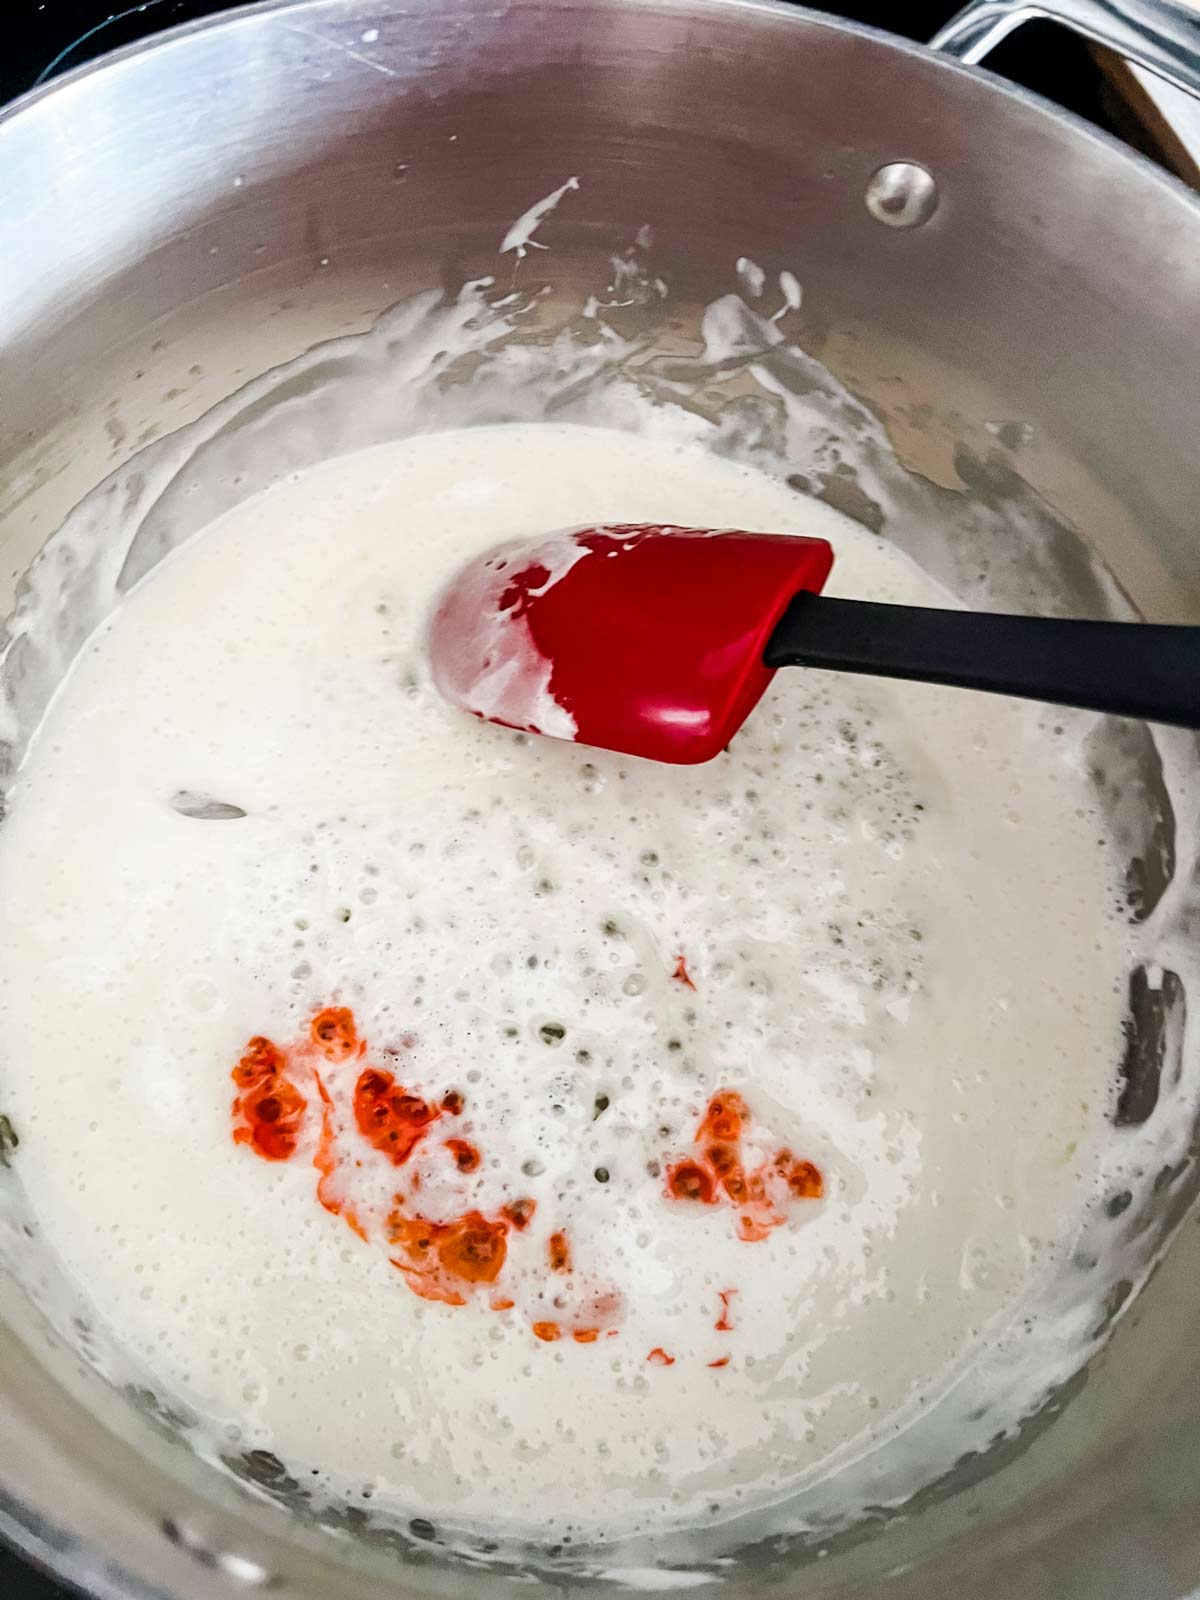 Orange food coloring added to melted marshmallows in a pot.